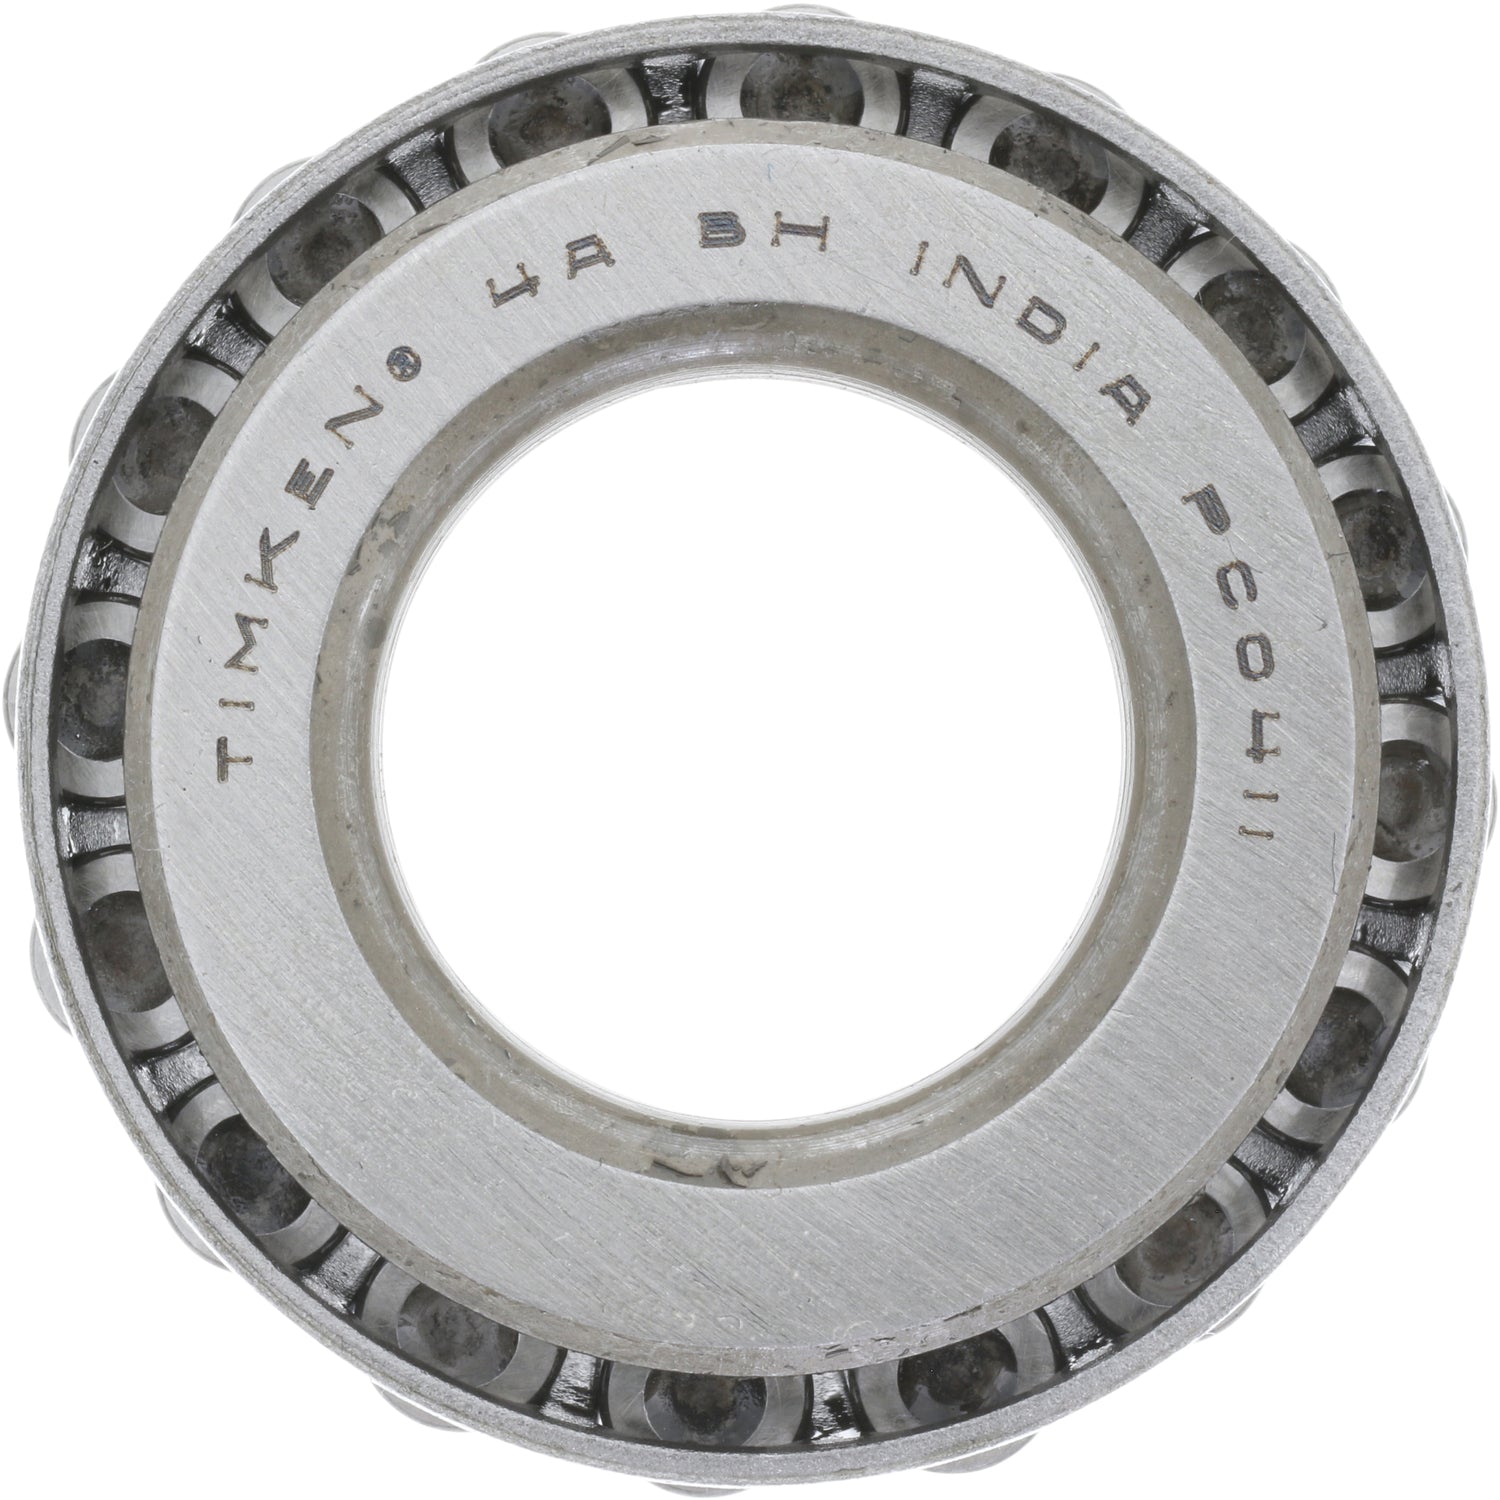 Steel tapered bearing on white background.